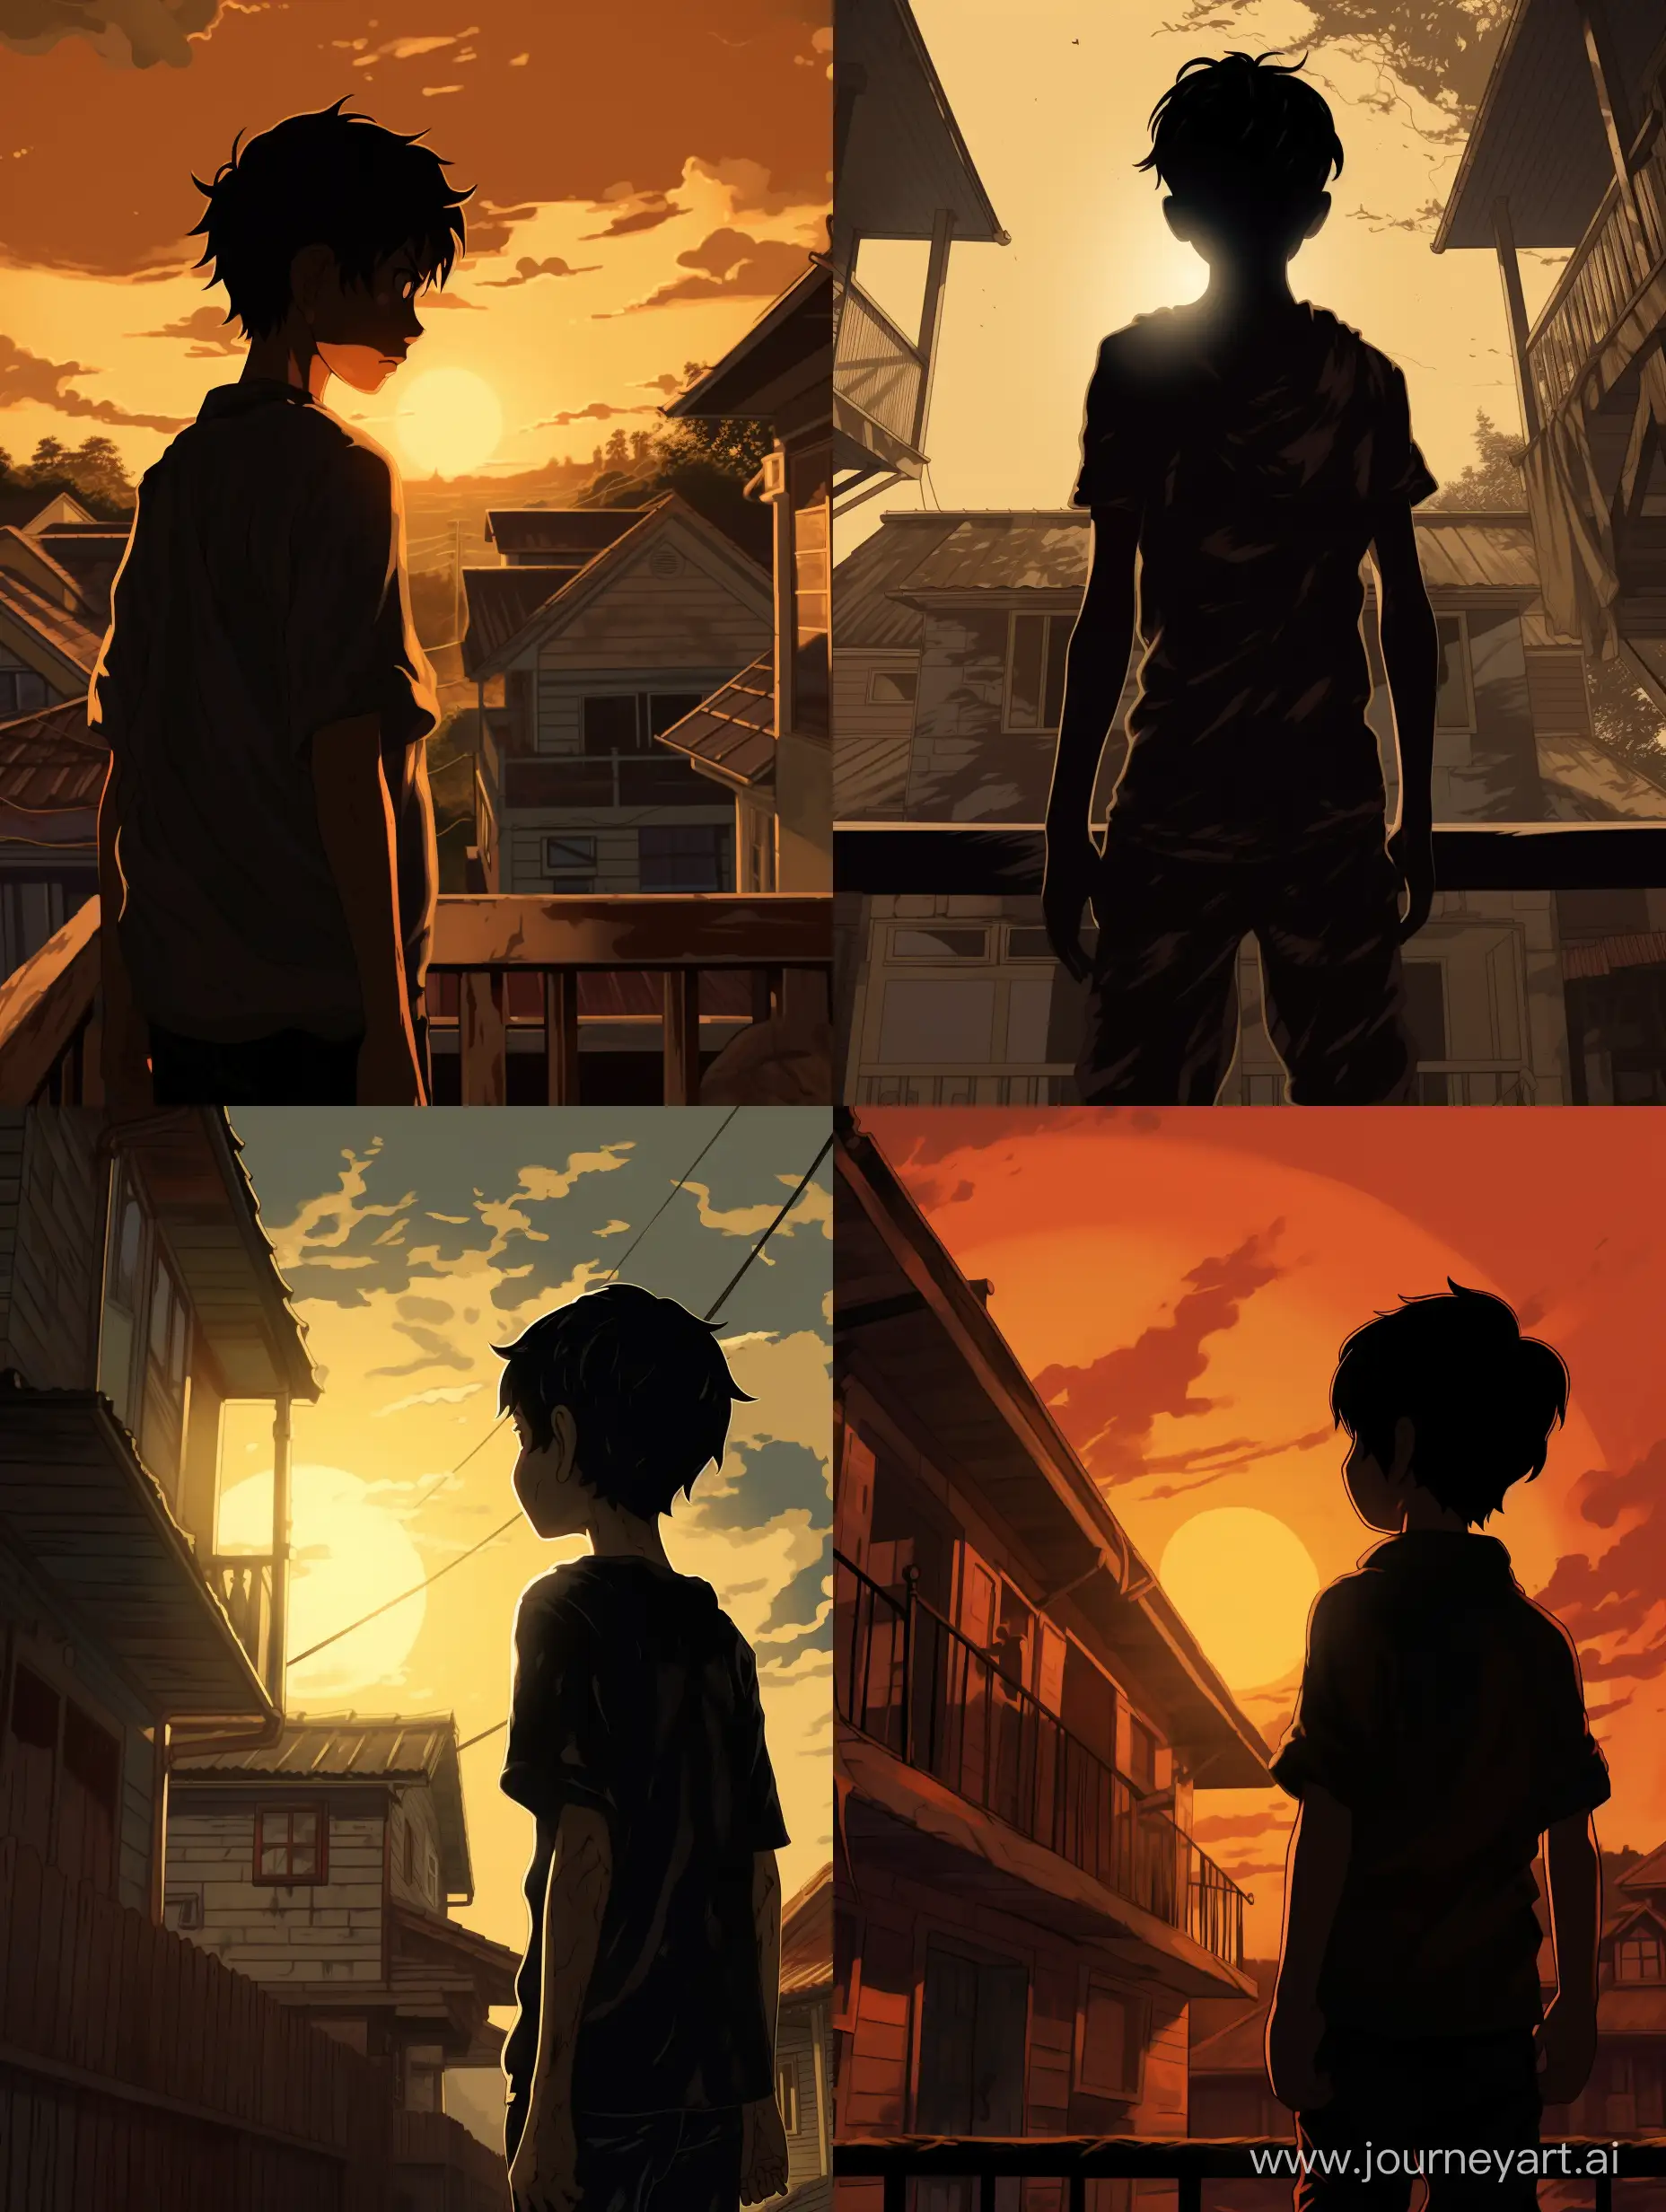 Mysterious-12YearOld-Boy-in-AnimeStyle-Shadows-at-House-Windows